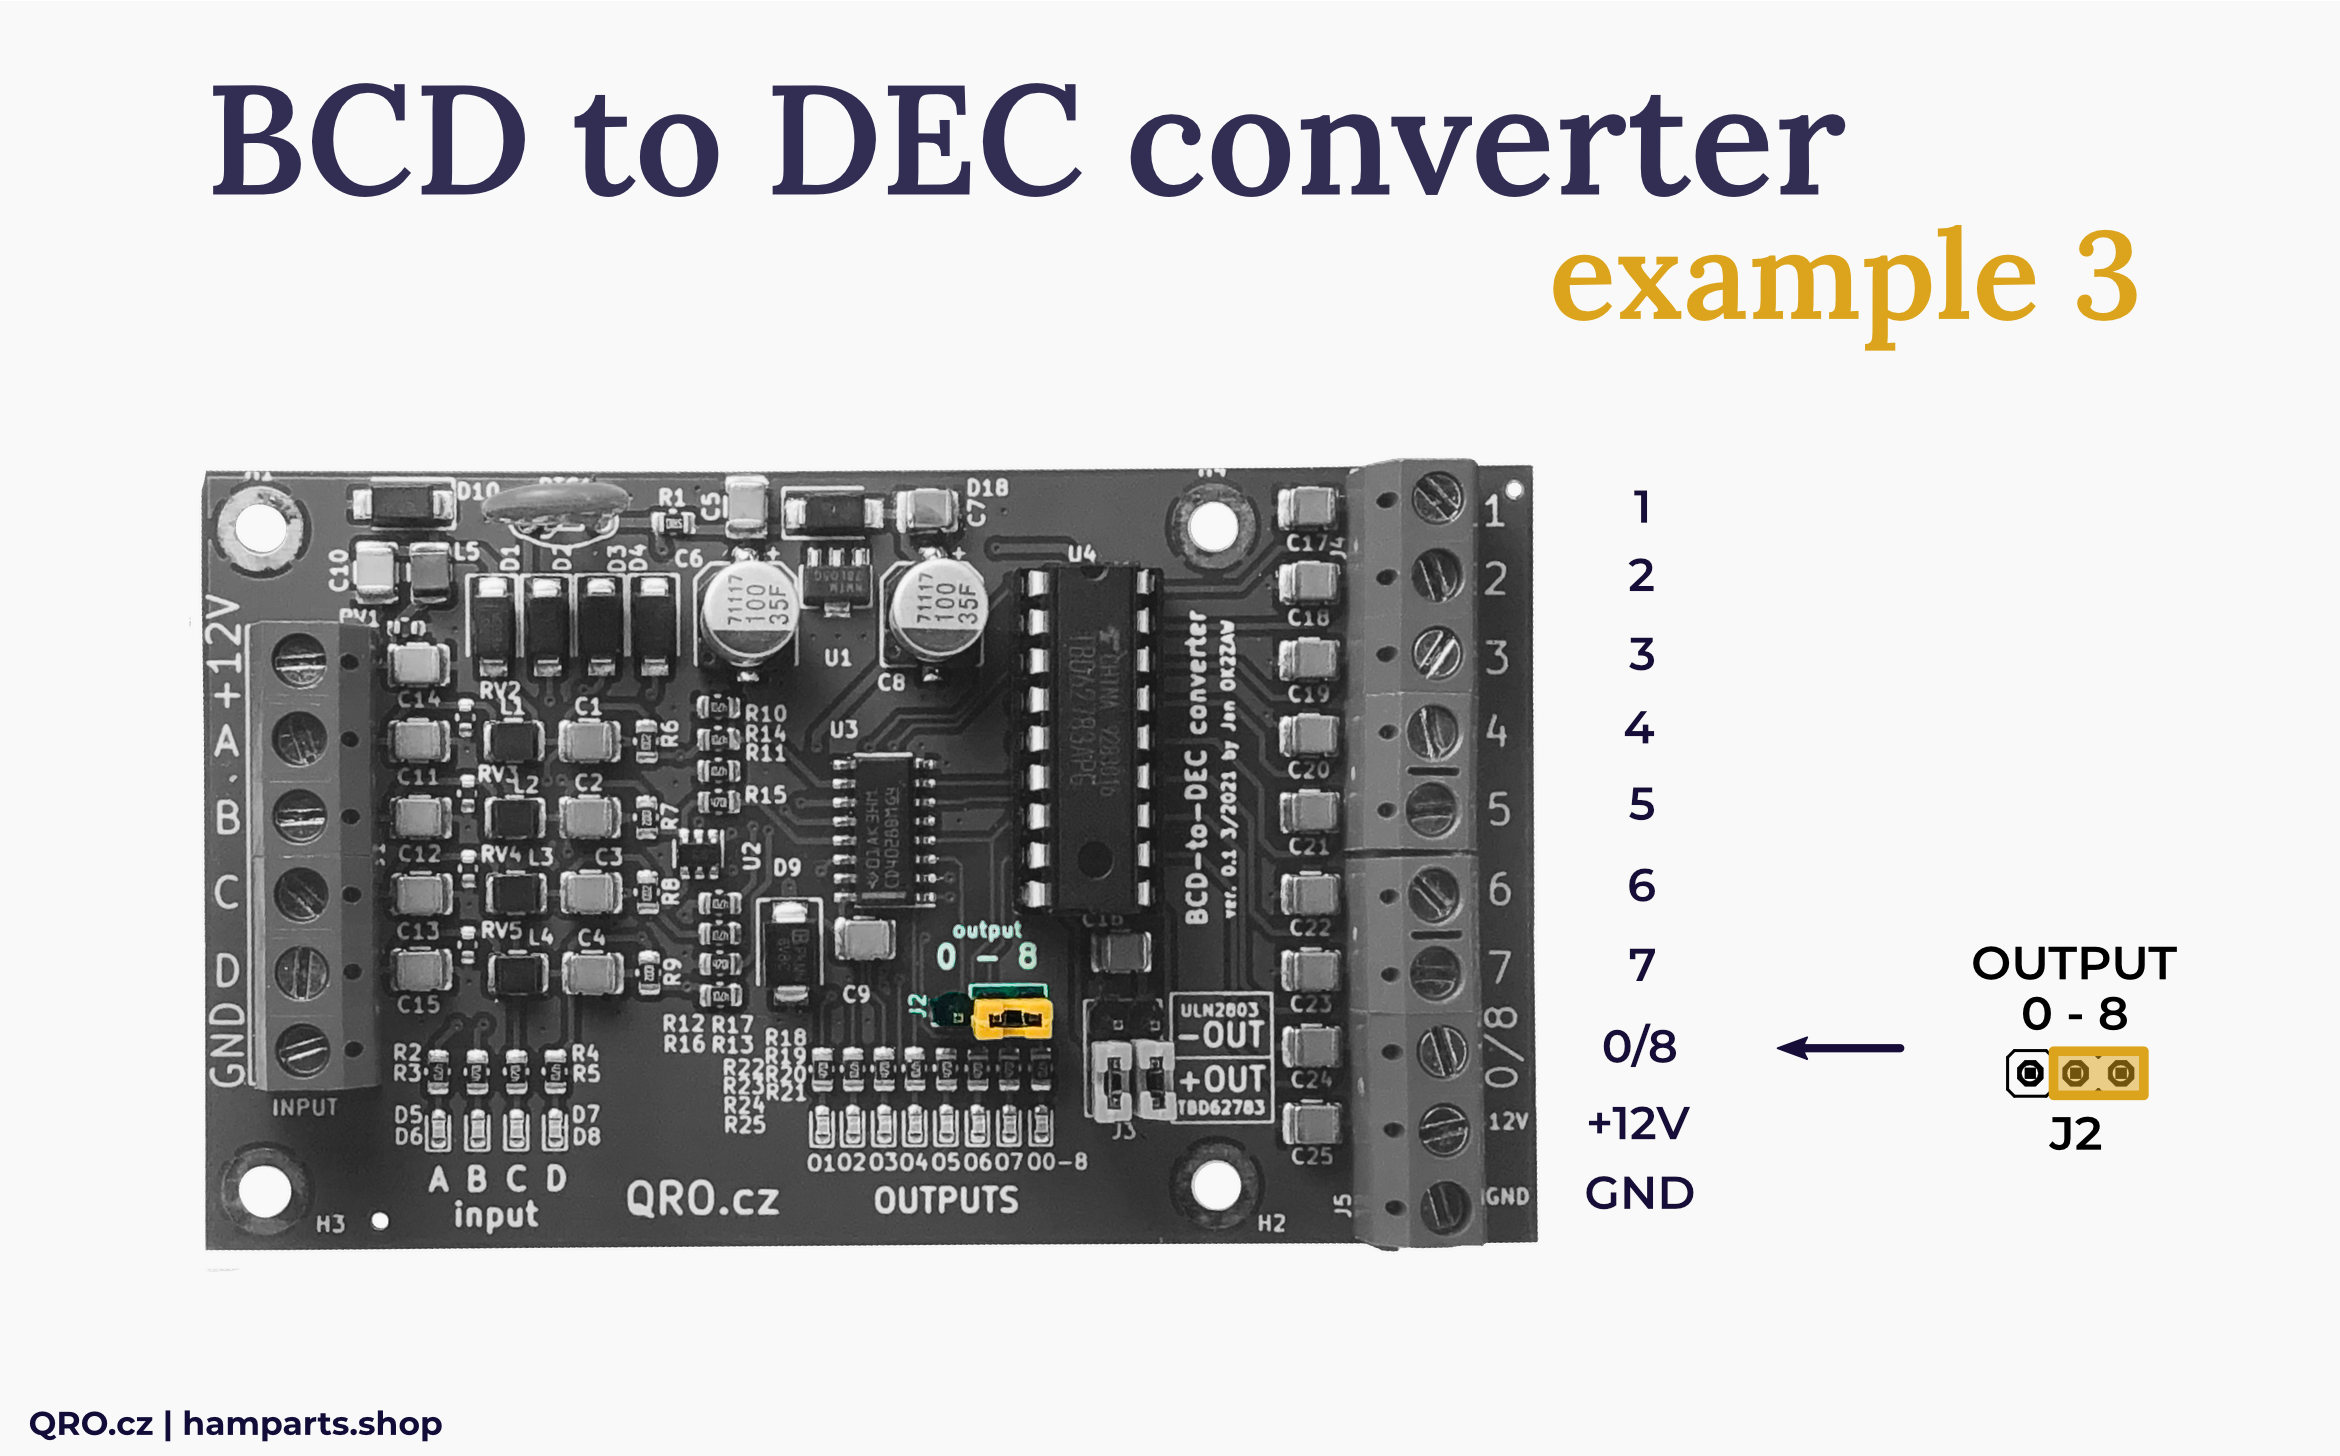 BCD to DEC converter switch example by qro.cz hamparts.shop